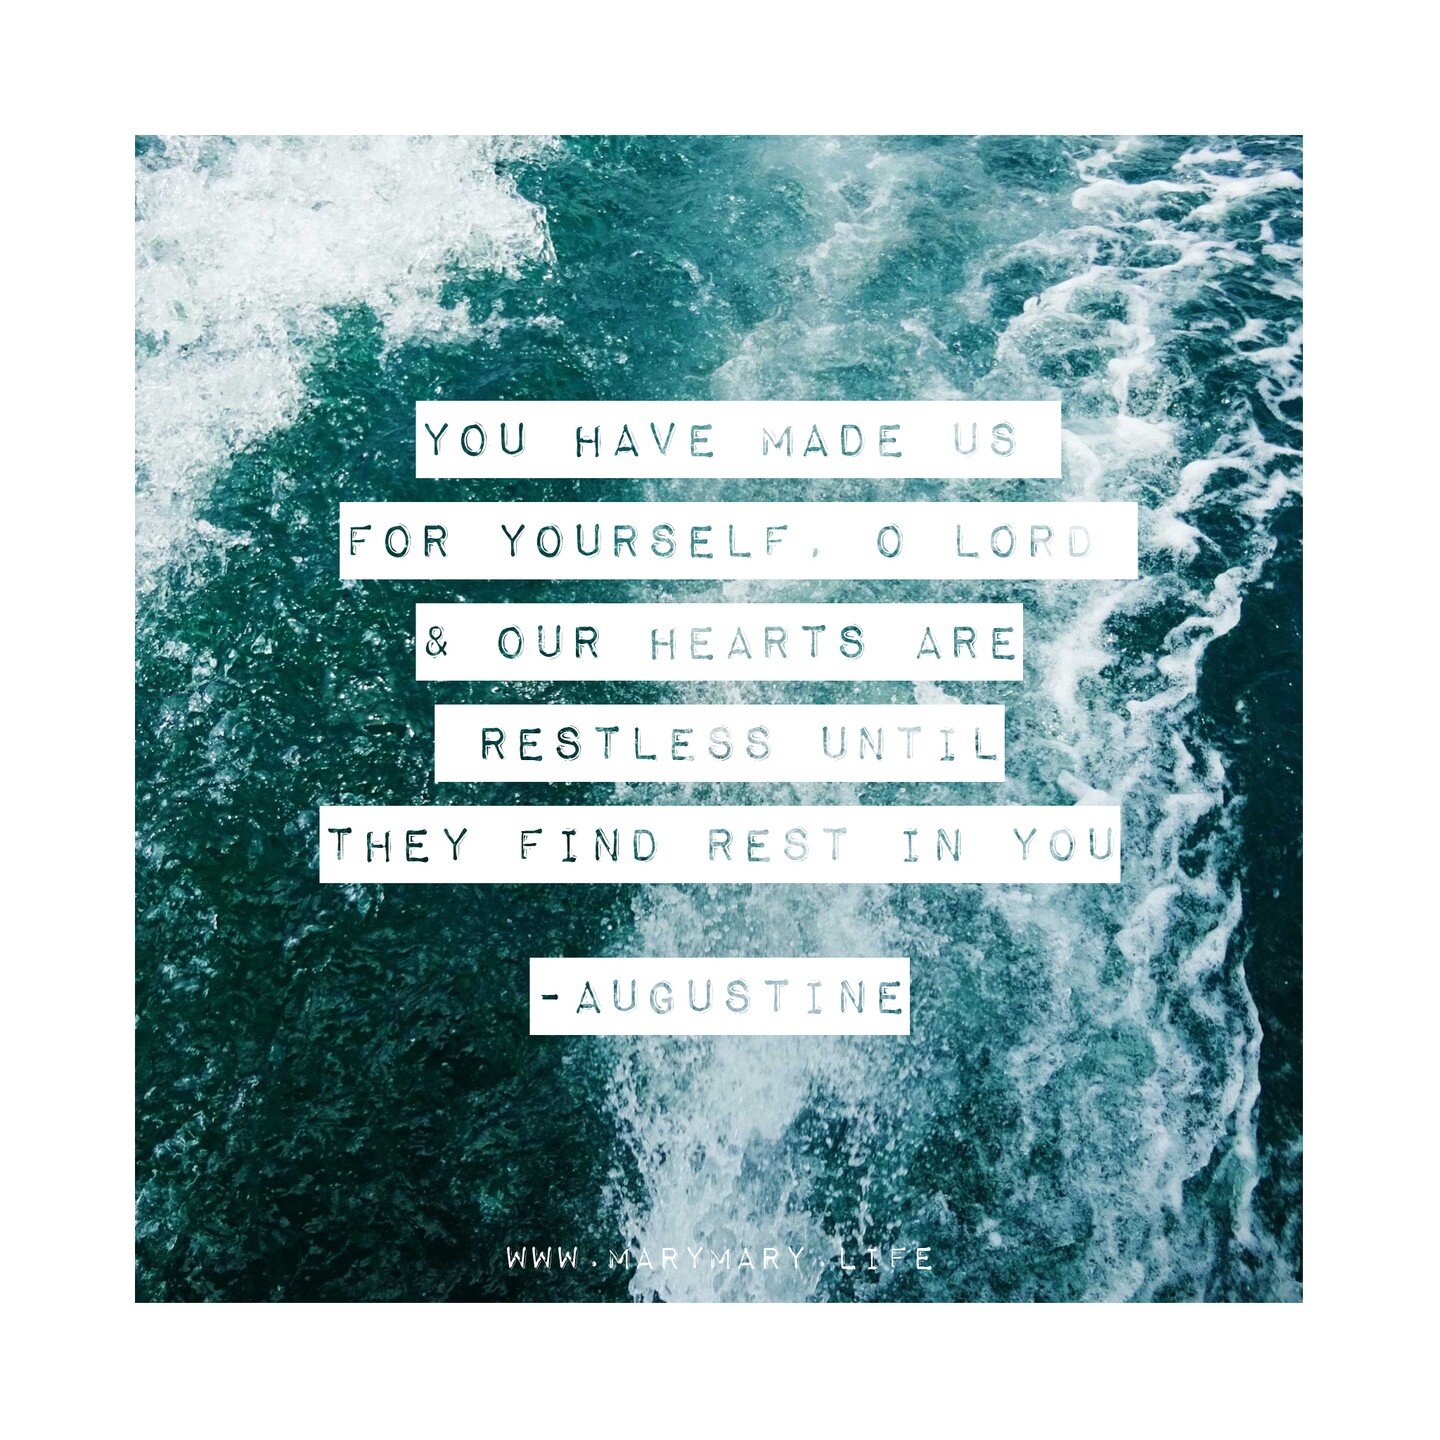 Our hearts are restless until they find rest in God